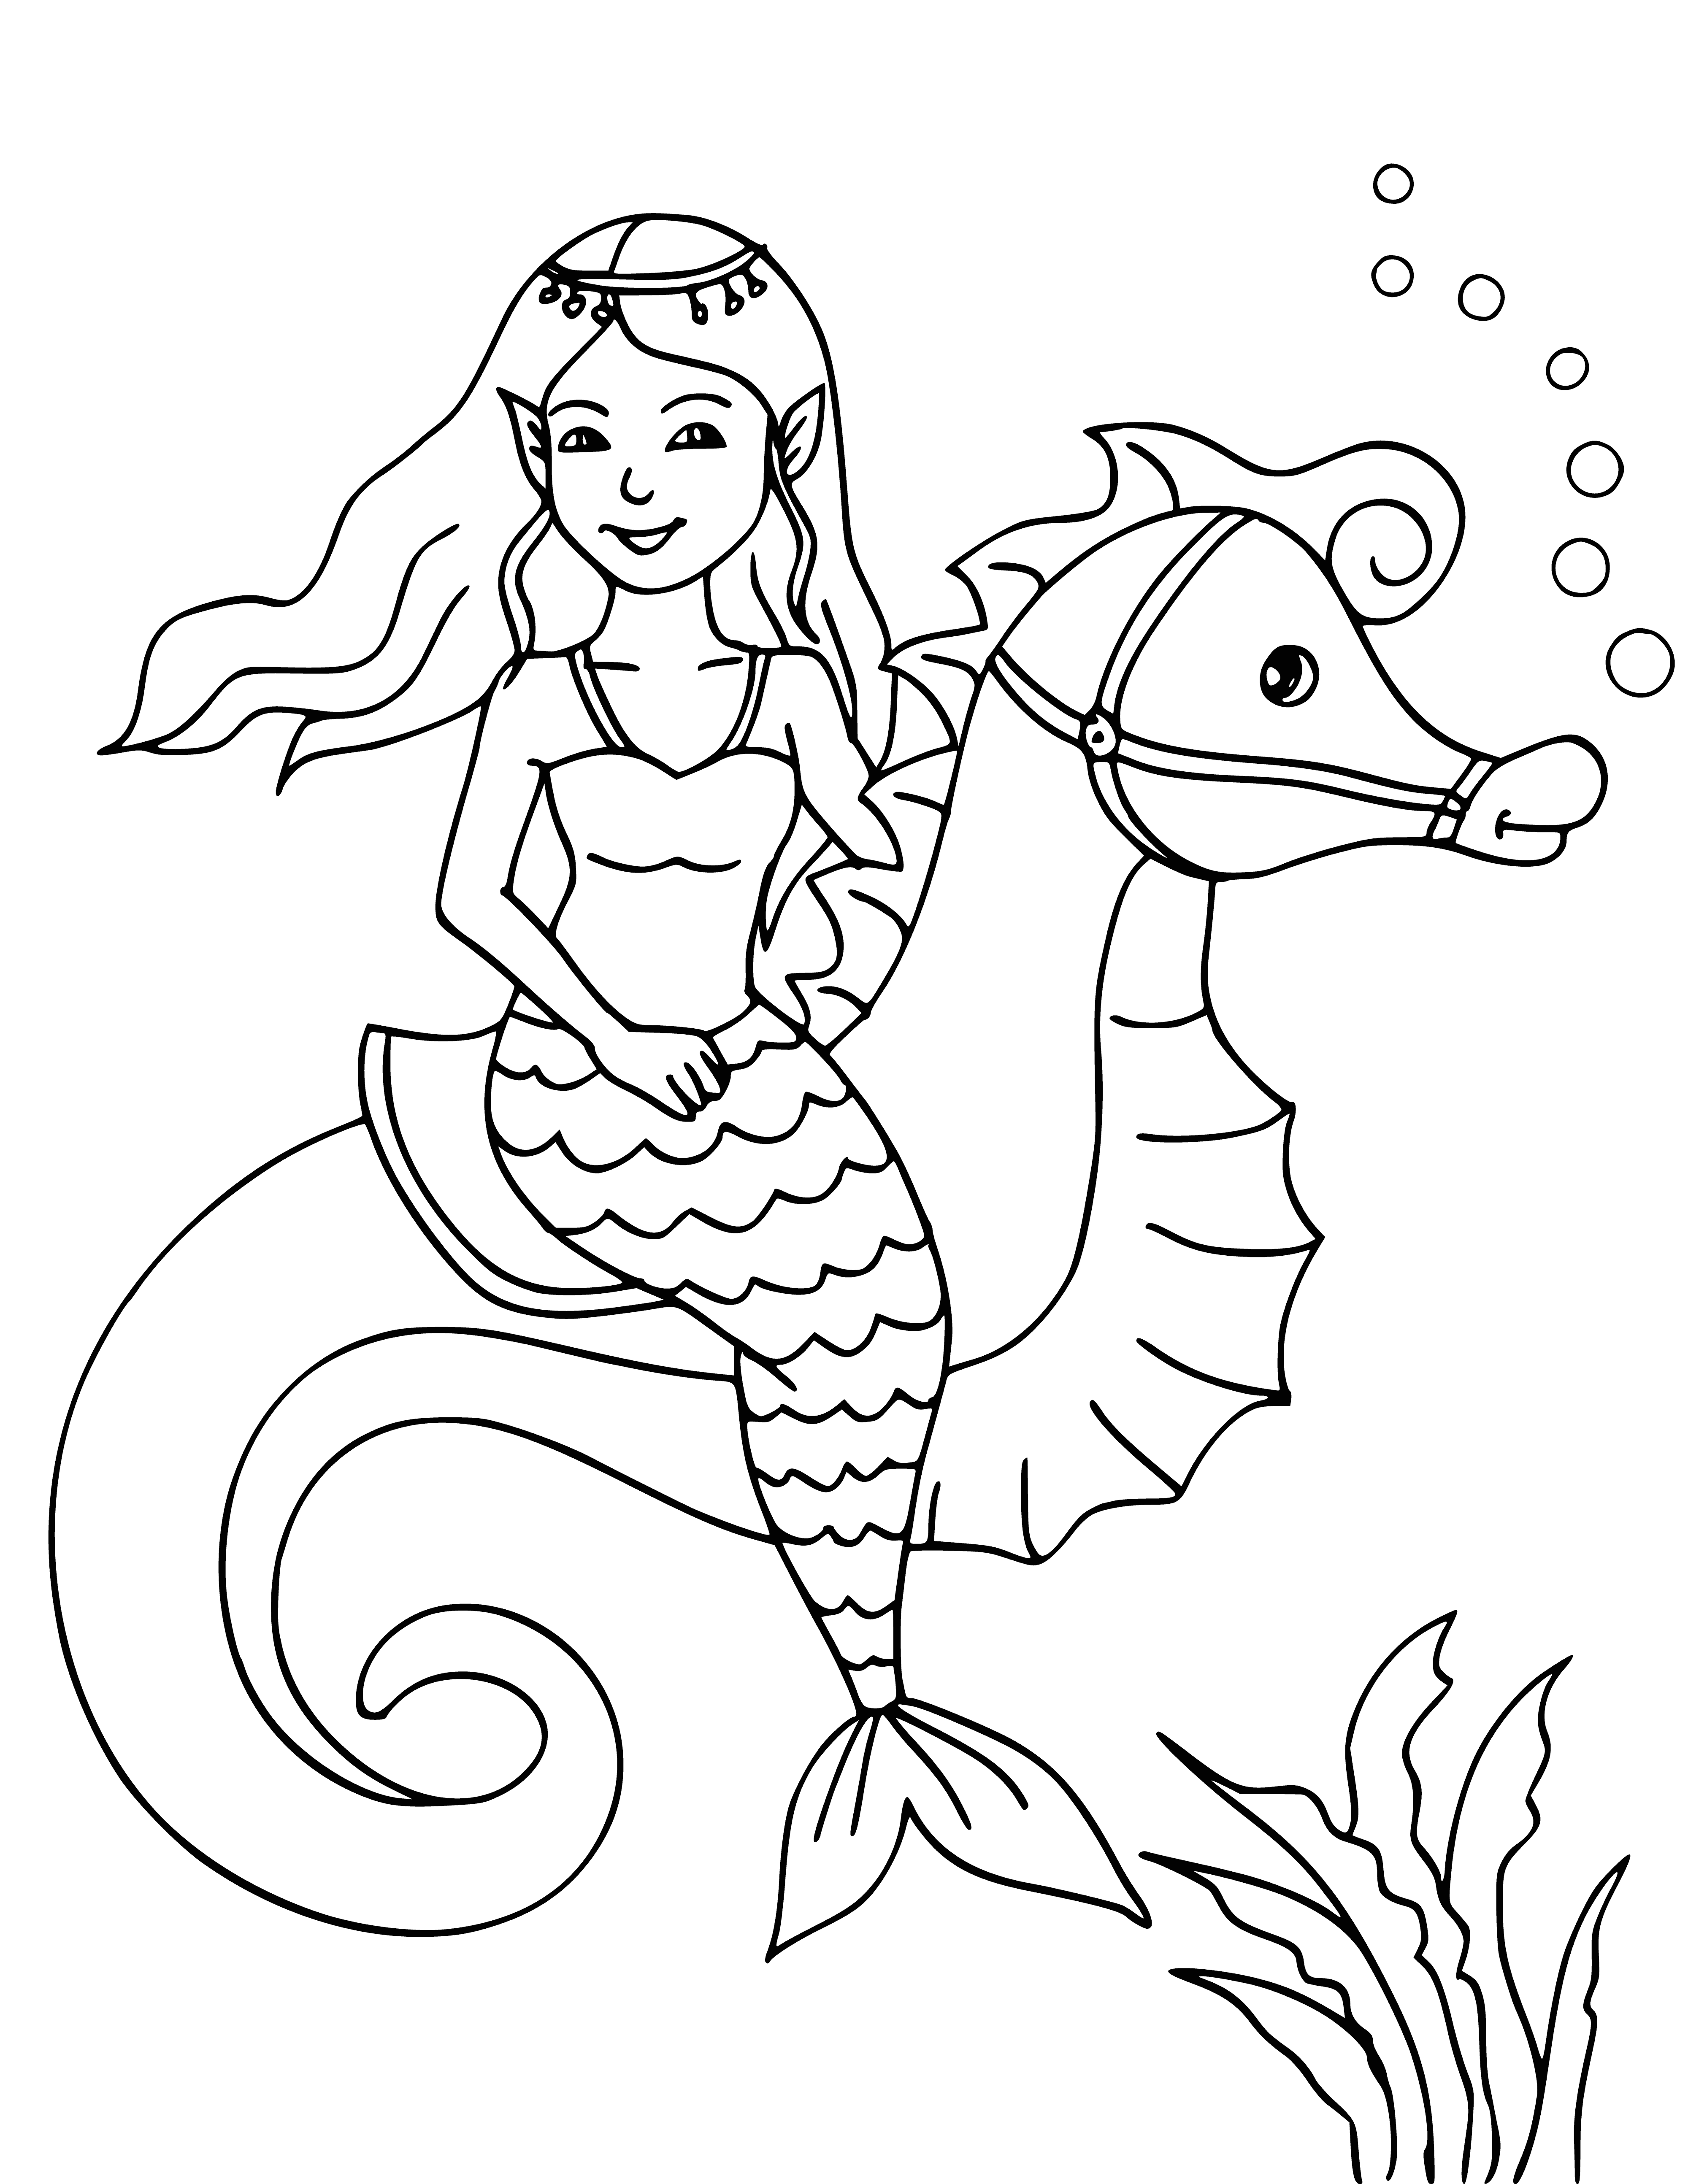 Mermaid and seahorse coloring page